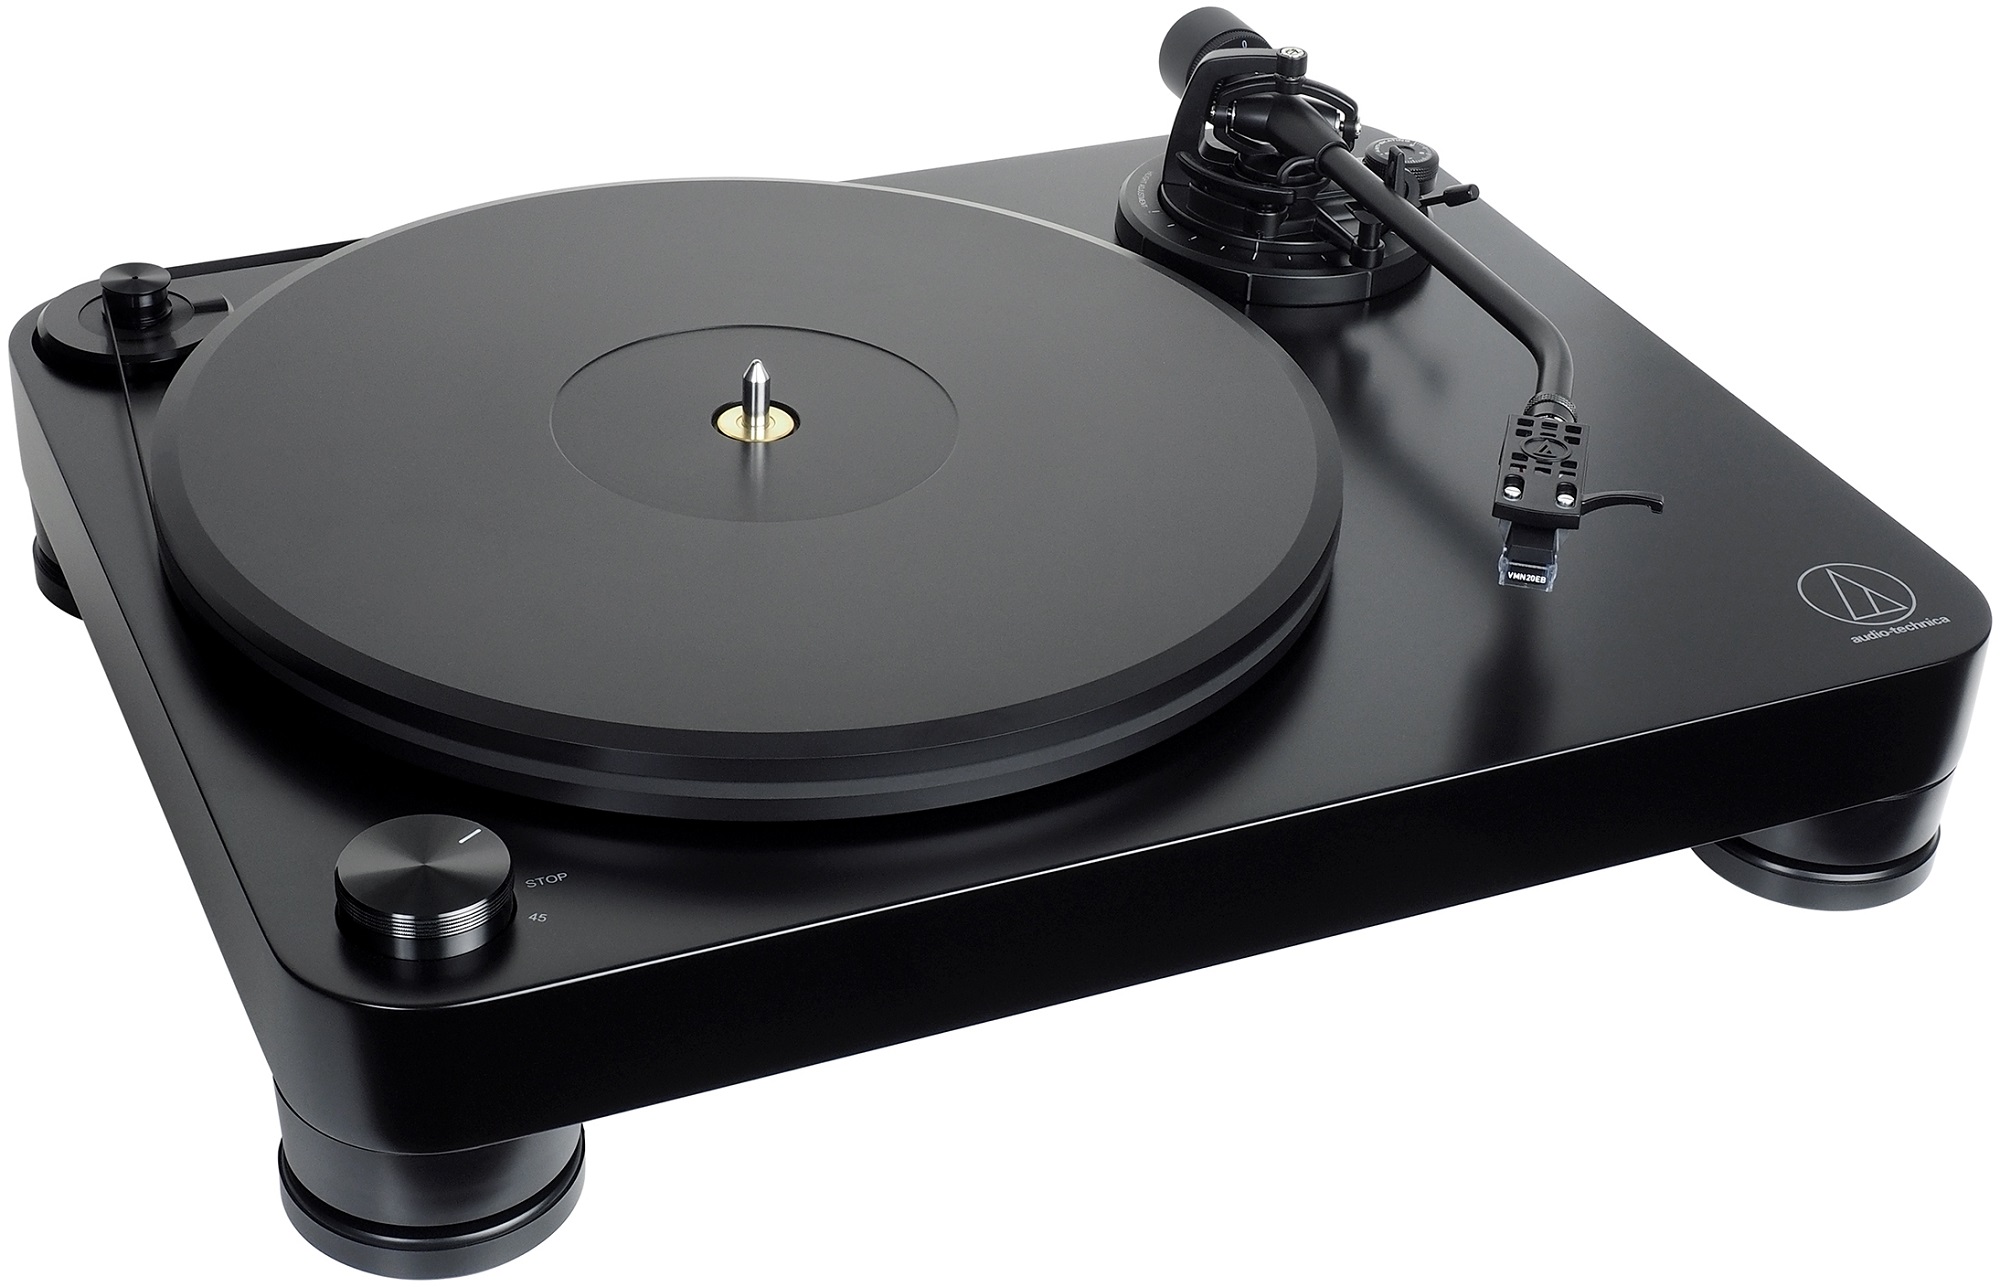 audio-technica-at-lp7-fully-manual-belt-drive-turntable-black